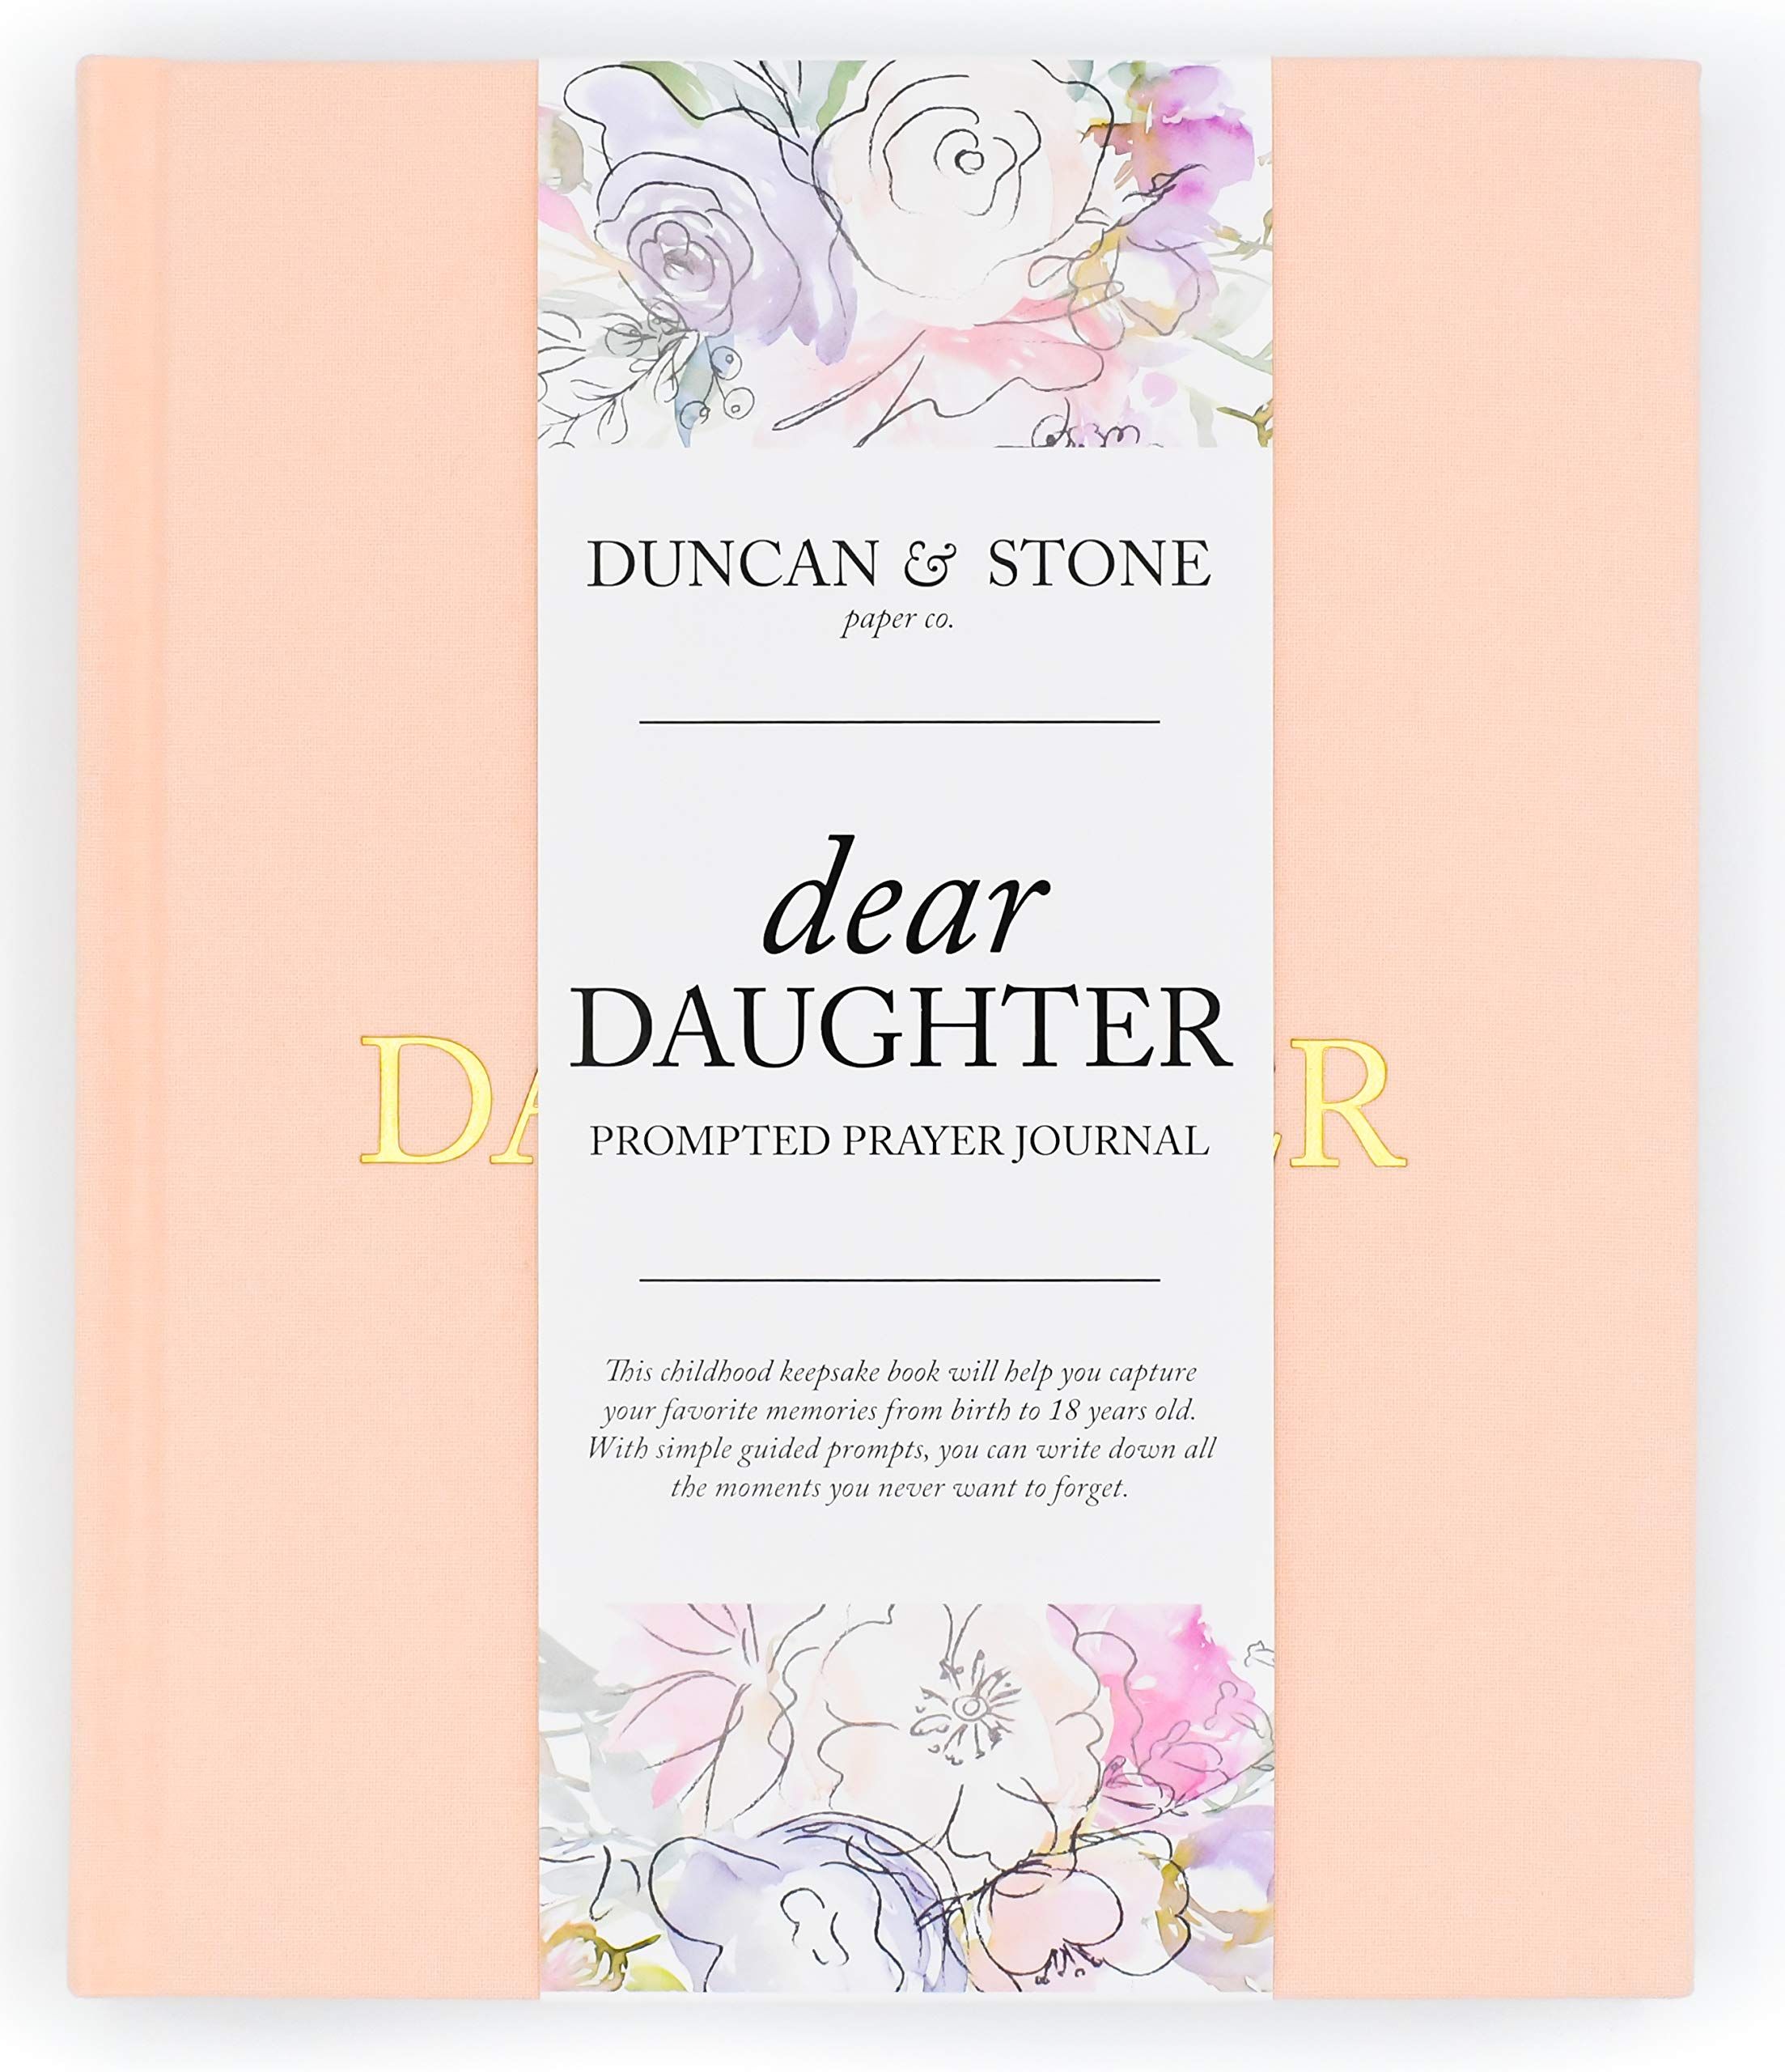 Dear Daughter: A Prompted Prayer Journal & Childhood Keepsake by Duncan & Stone - Pink | Baby Gir... | Amazon (US)